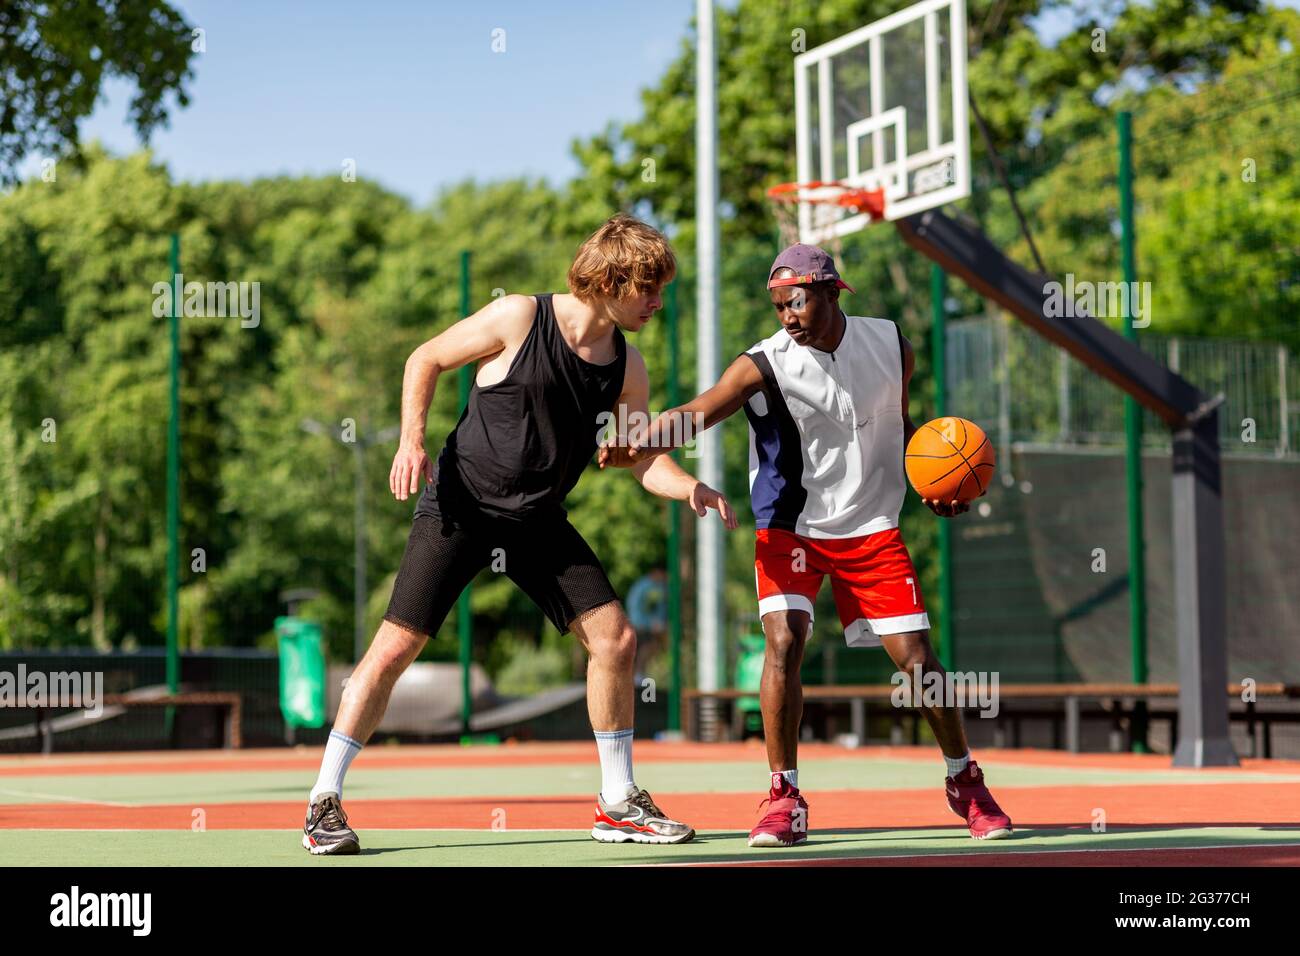 Two professional basketball players training for competition at outdoor court Stock Photo